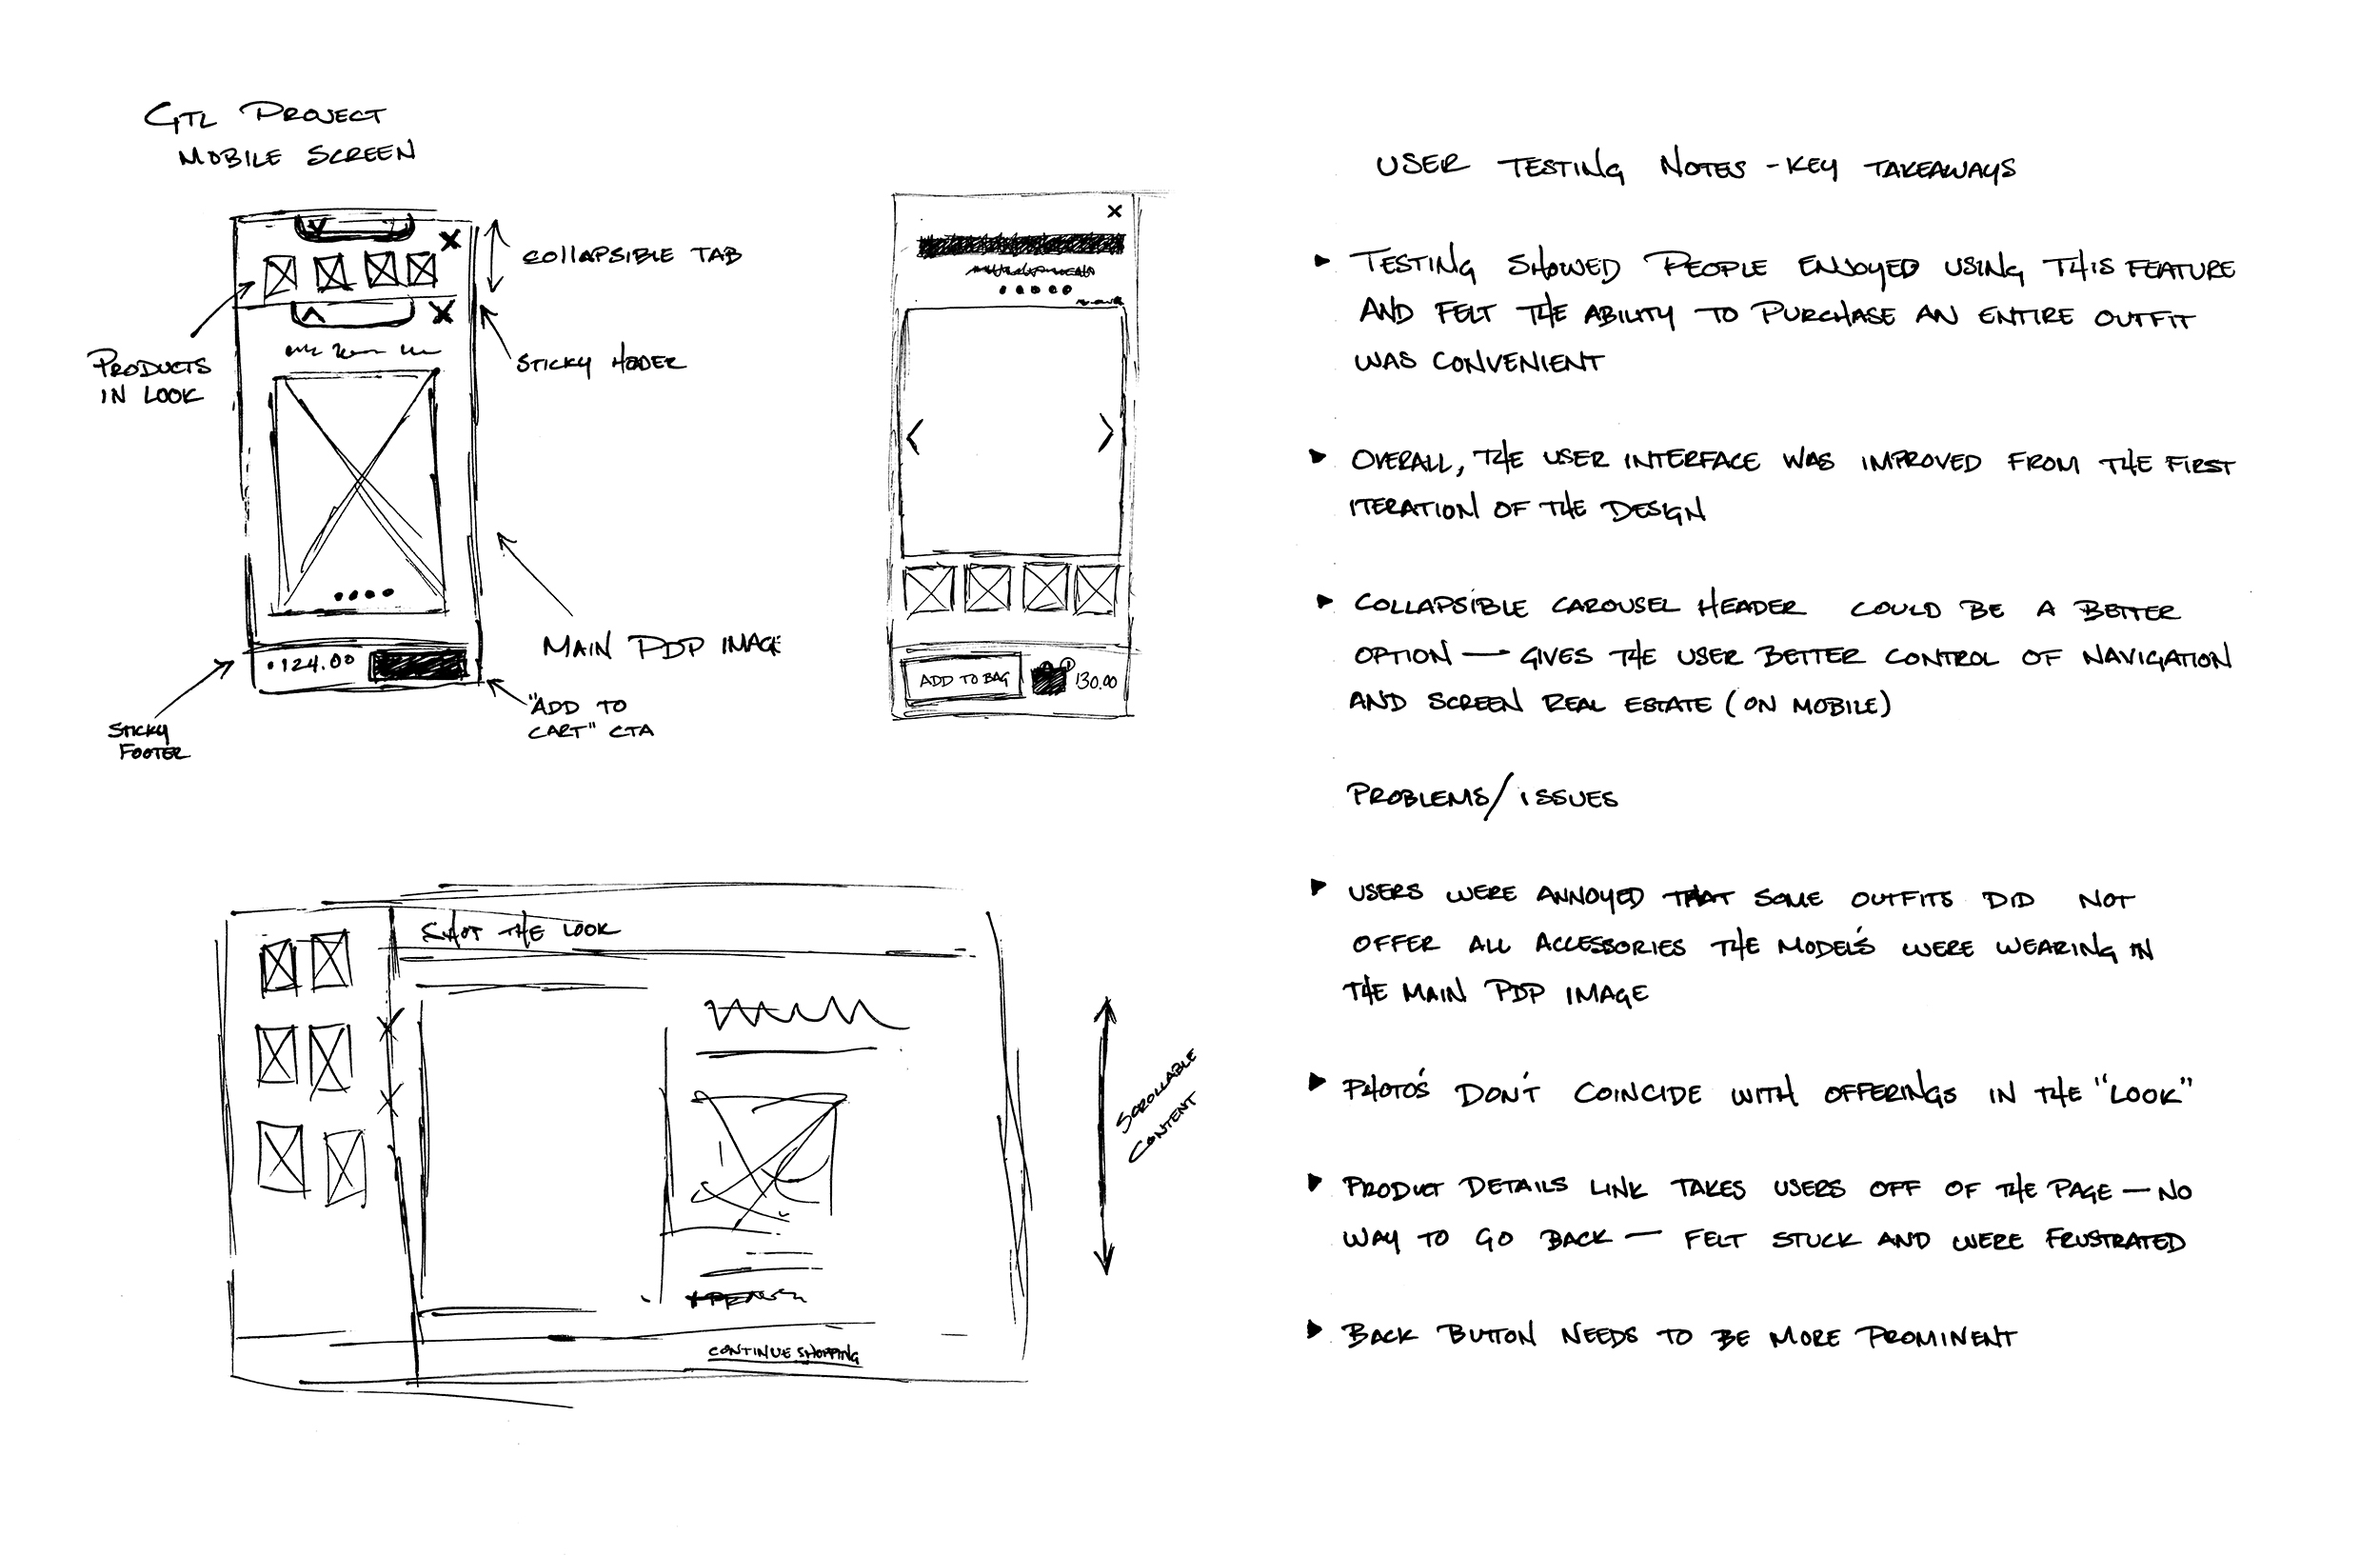 Initial sketches and notes for Shop This Look project